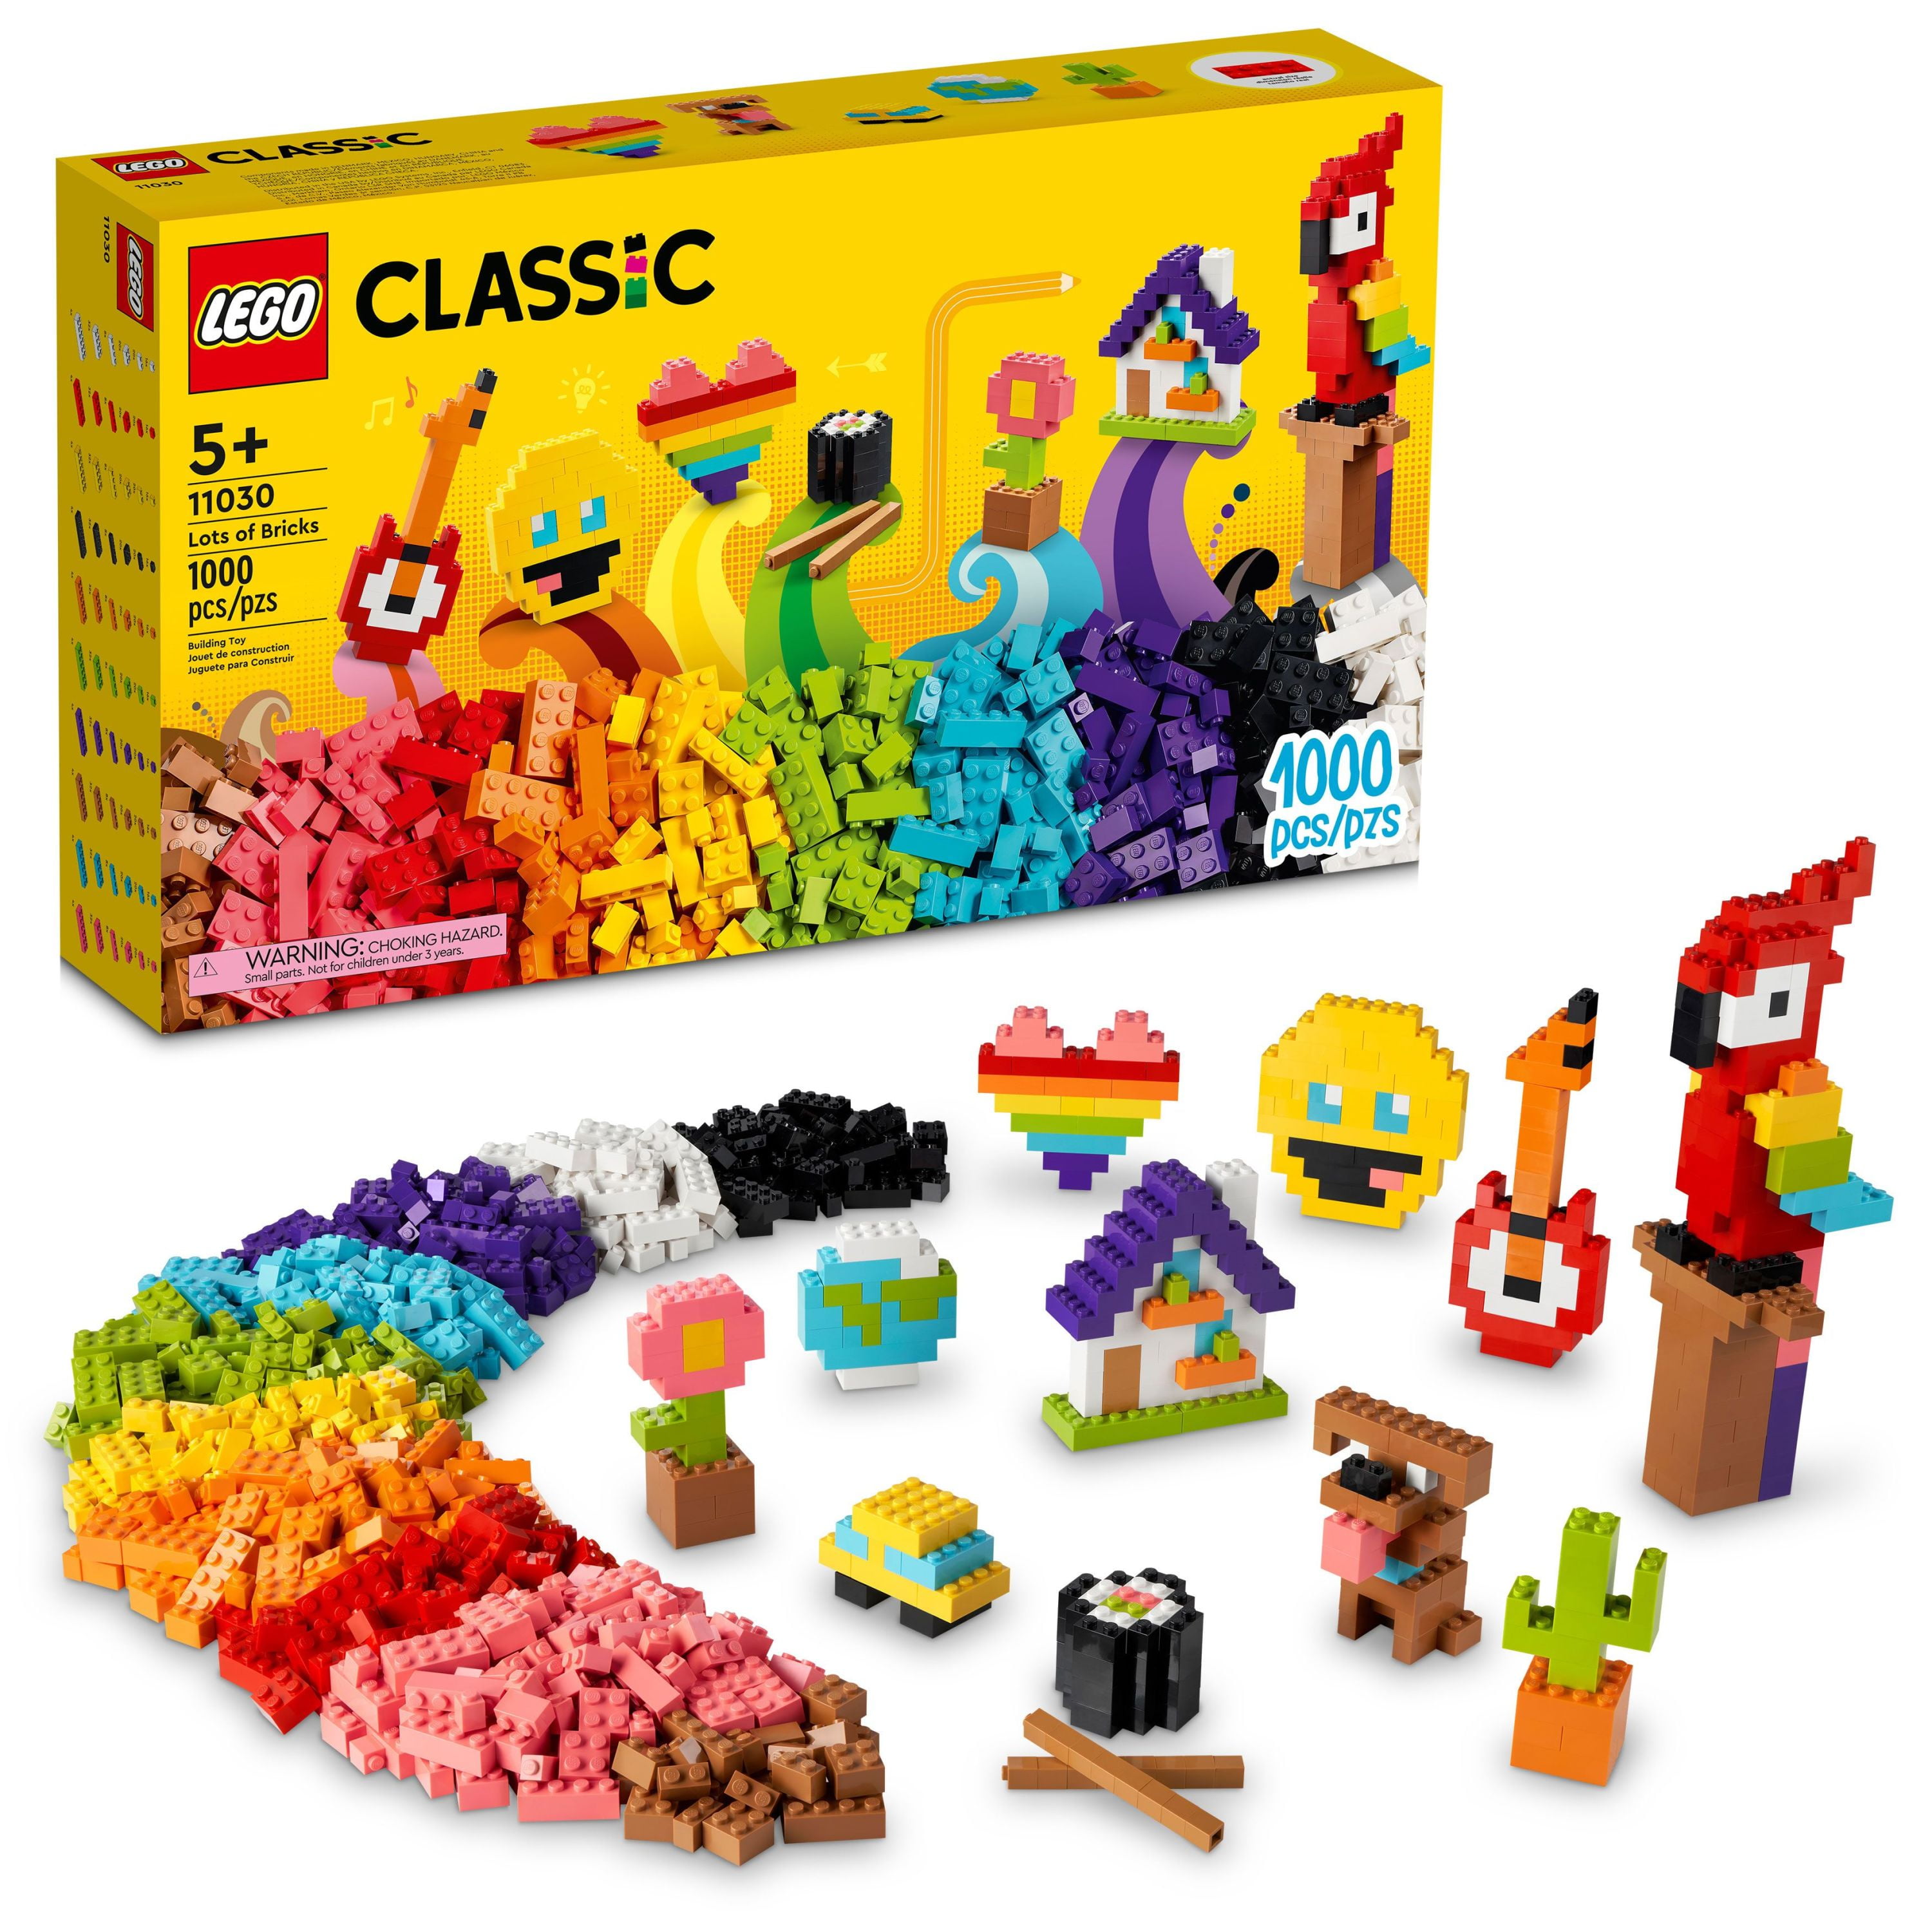 LEGO Classic Lots of Bricks Construction Toy Set Build a Smiley Parrot, Flowers & More, Creative for Kids, Boys, Girls ages 5 Plus - Walmart.com